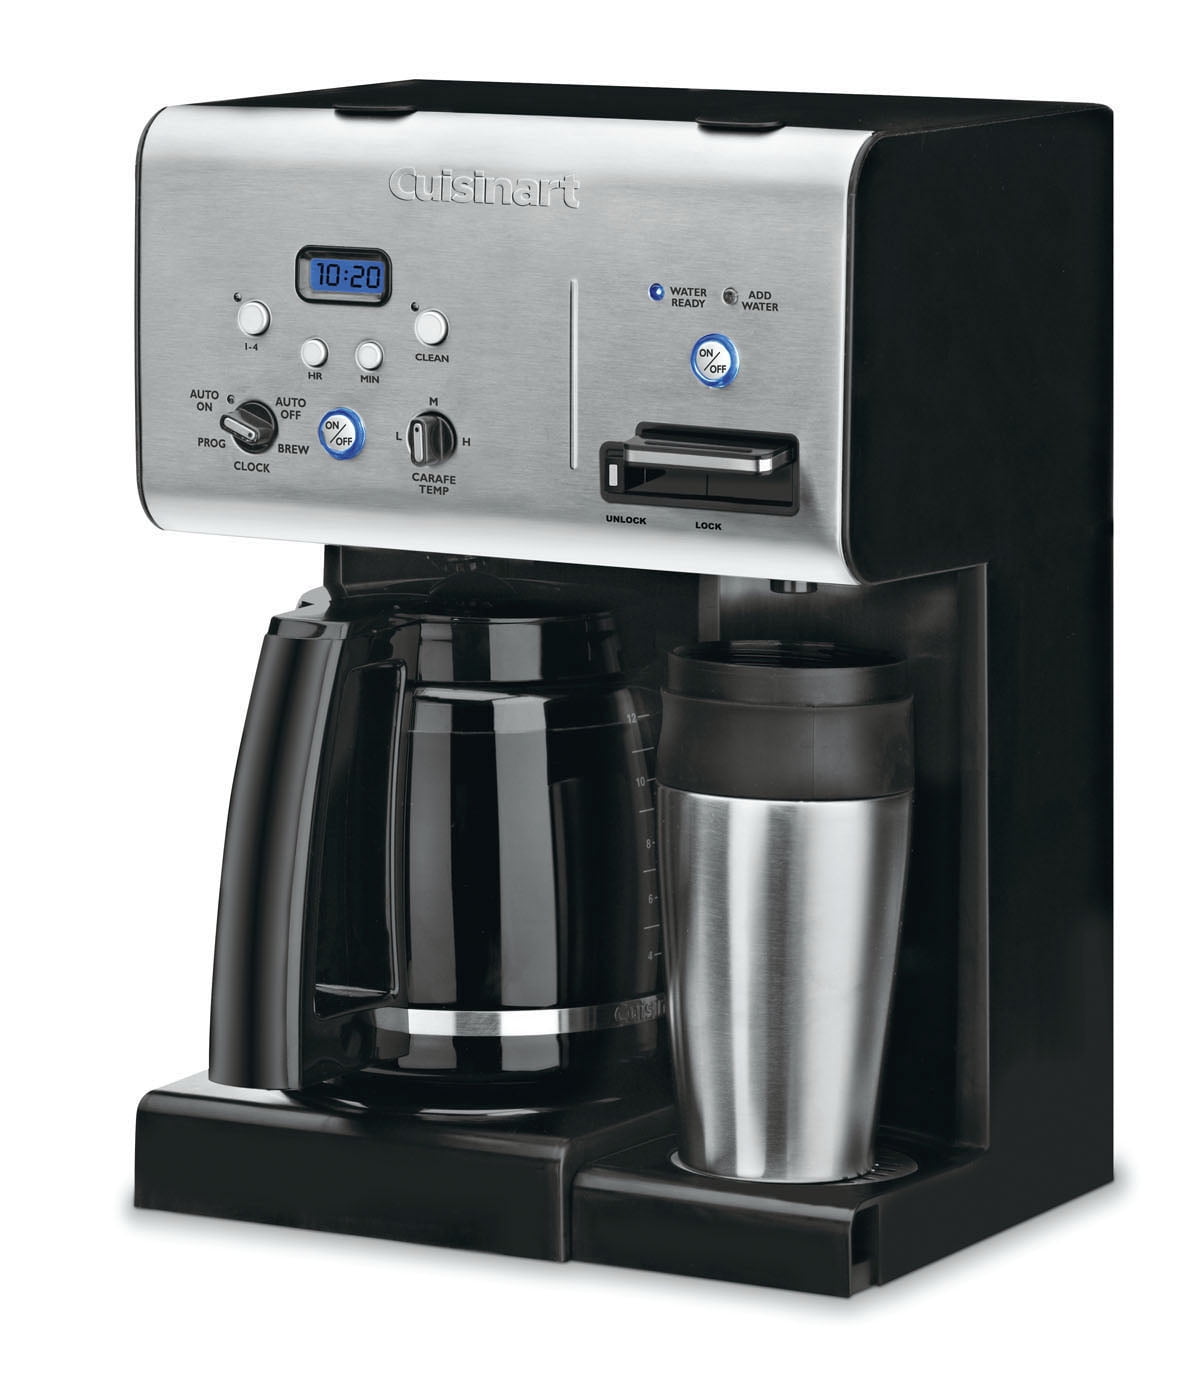 Details about   Cuisinart Coffee Plus 12-Cup Programmable Coffee Maker Hot Water Silver Black 